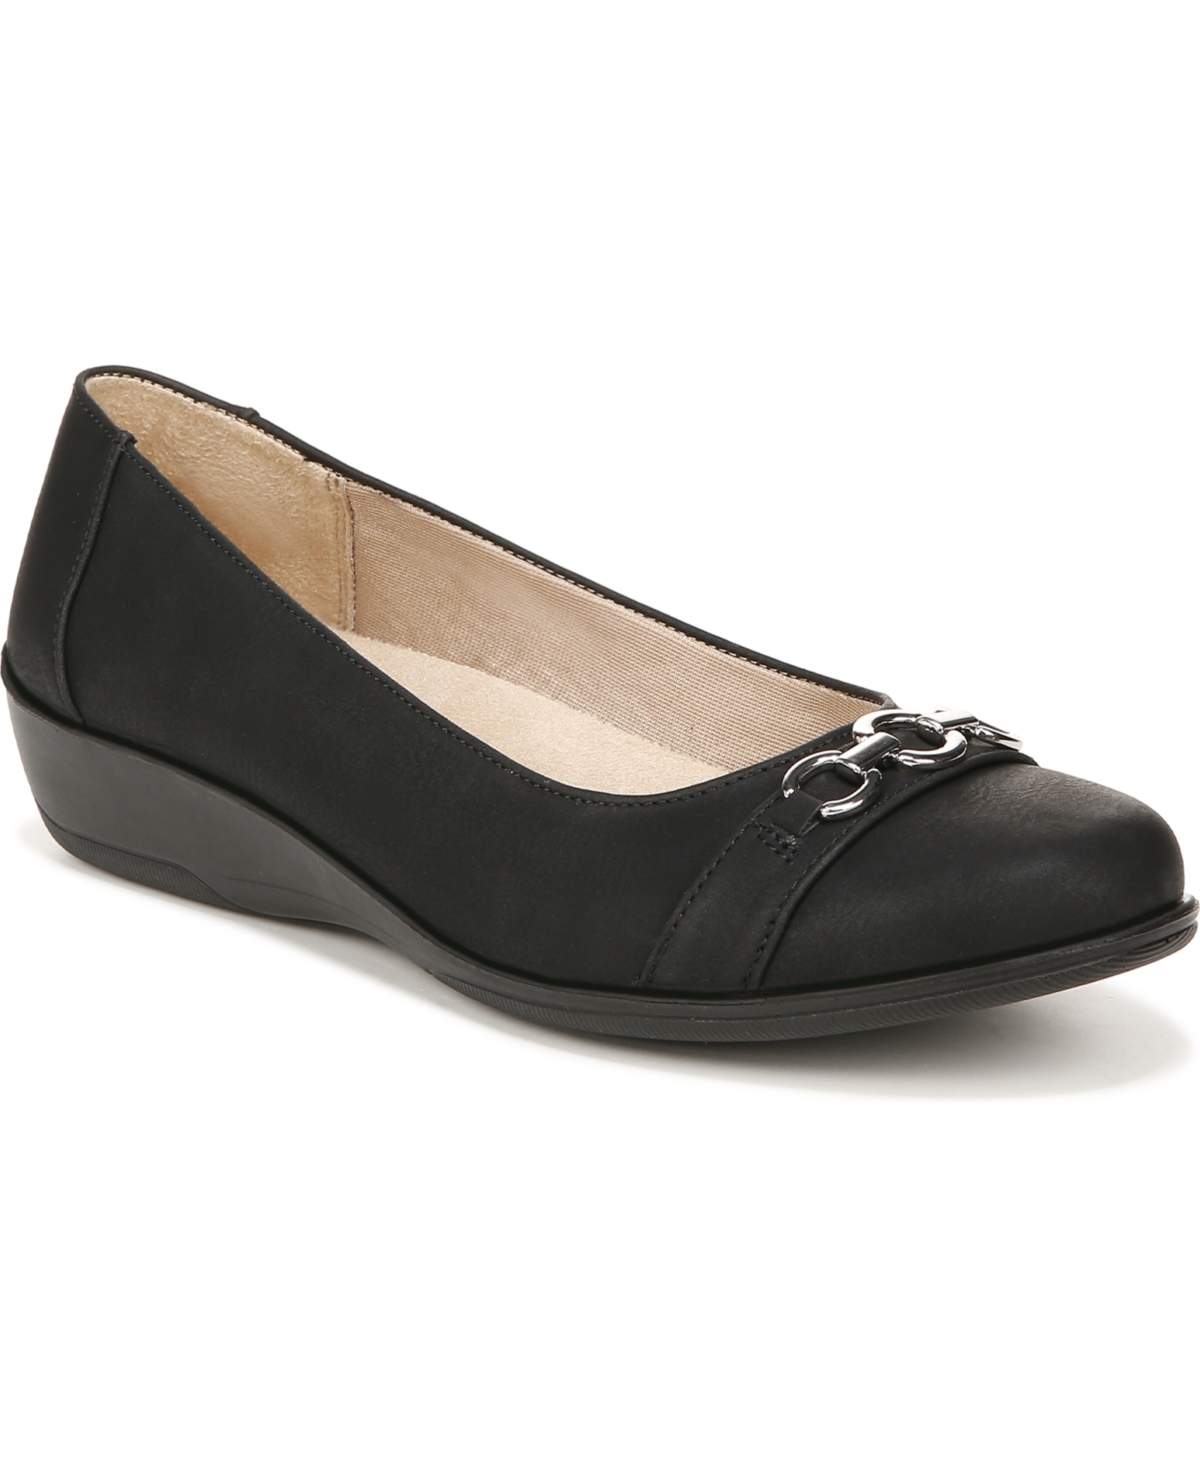 Ideal Flats - Black Faux Leather